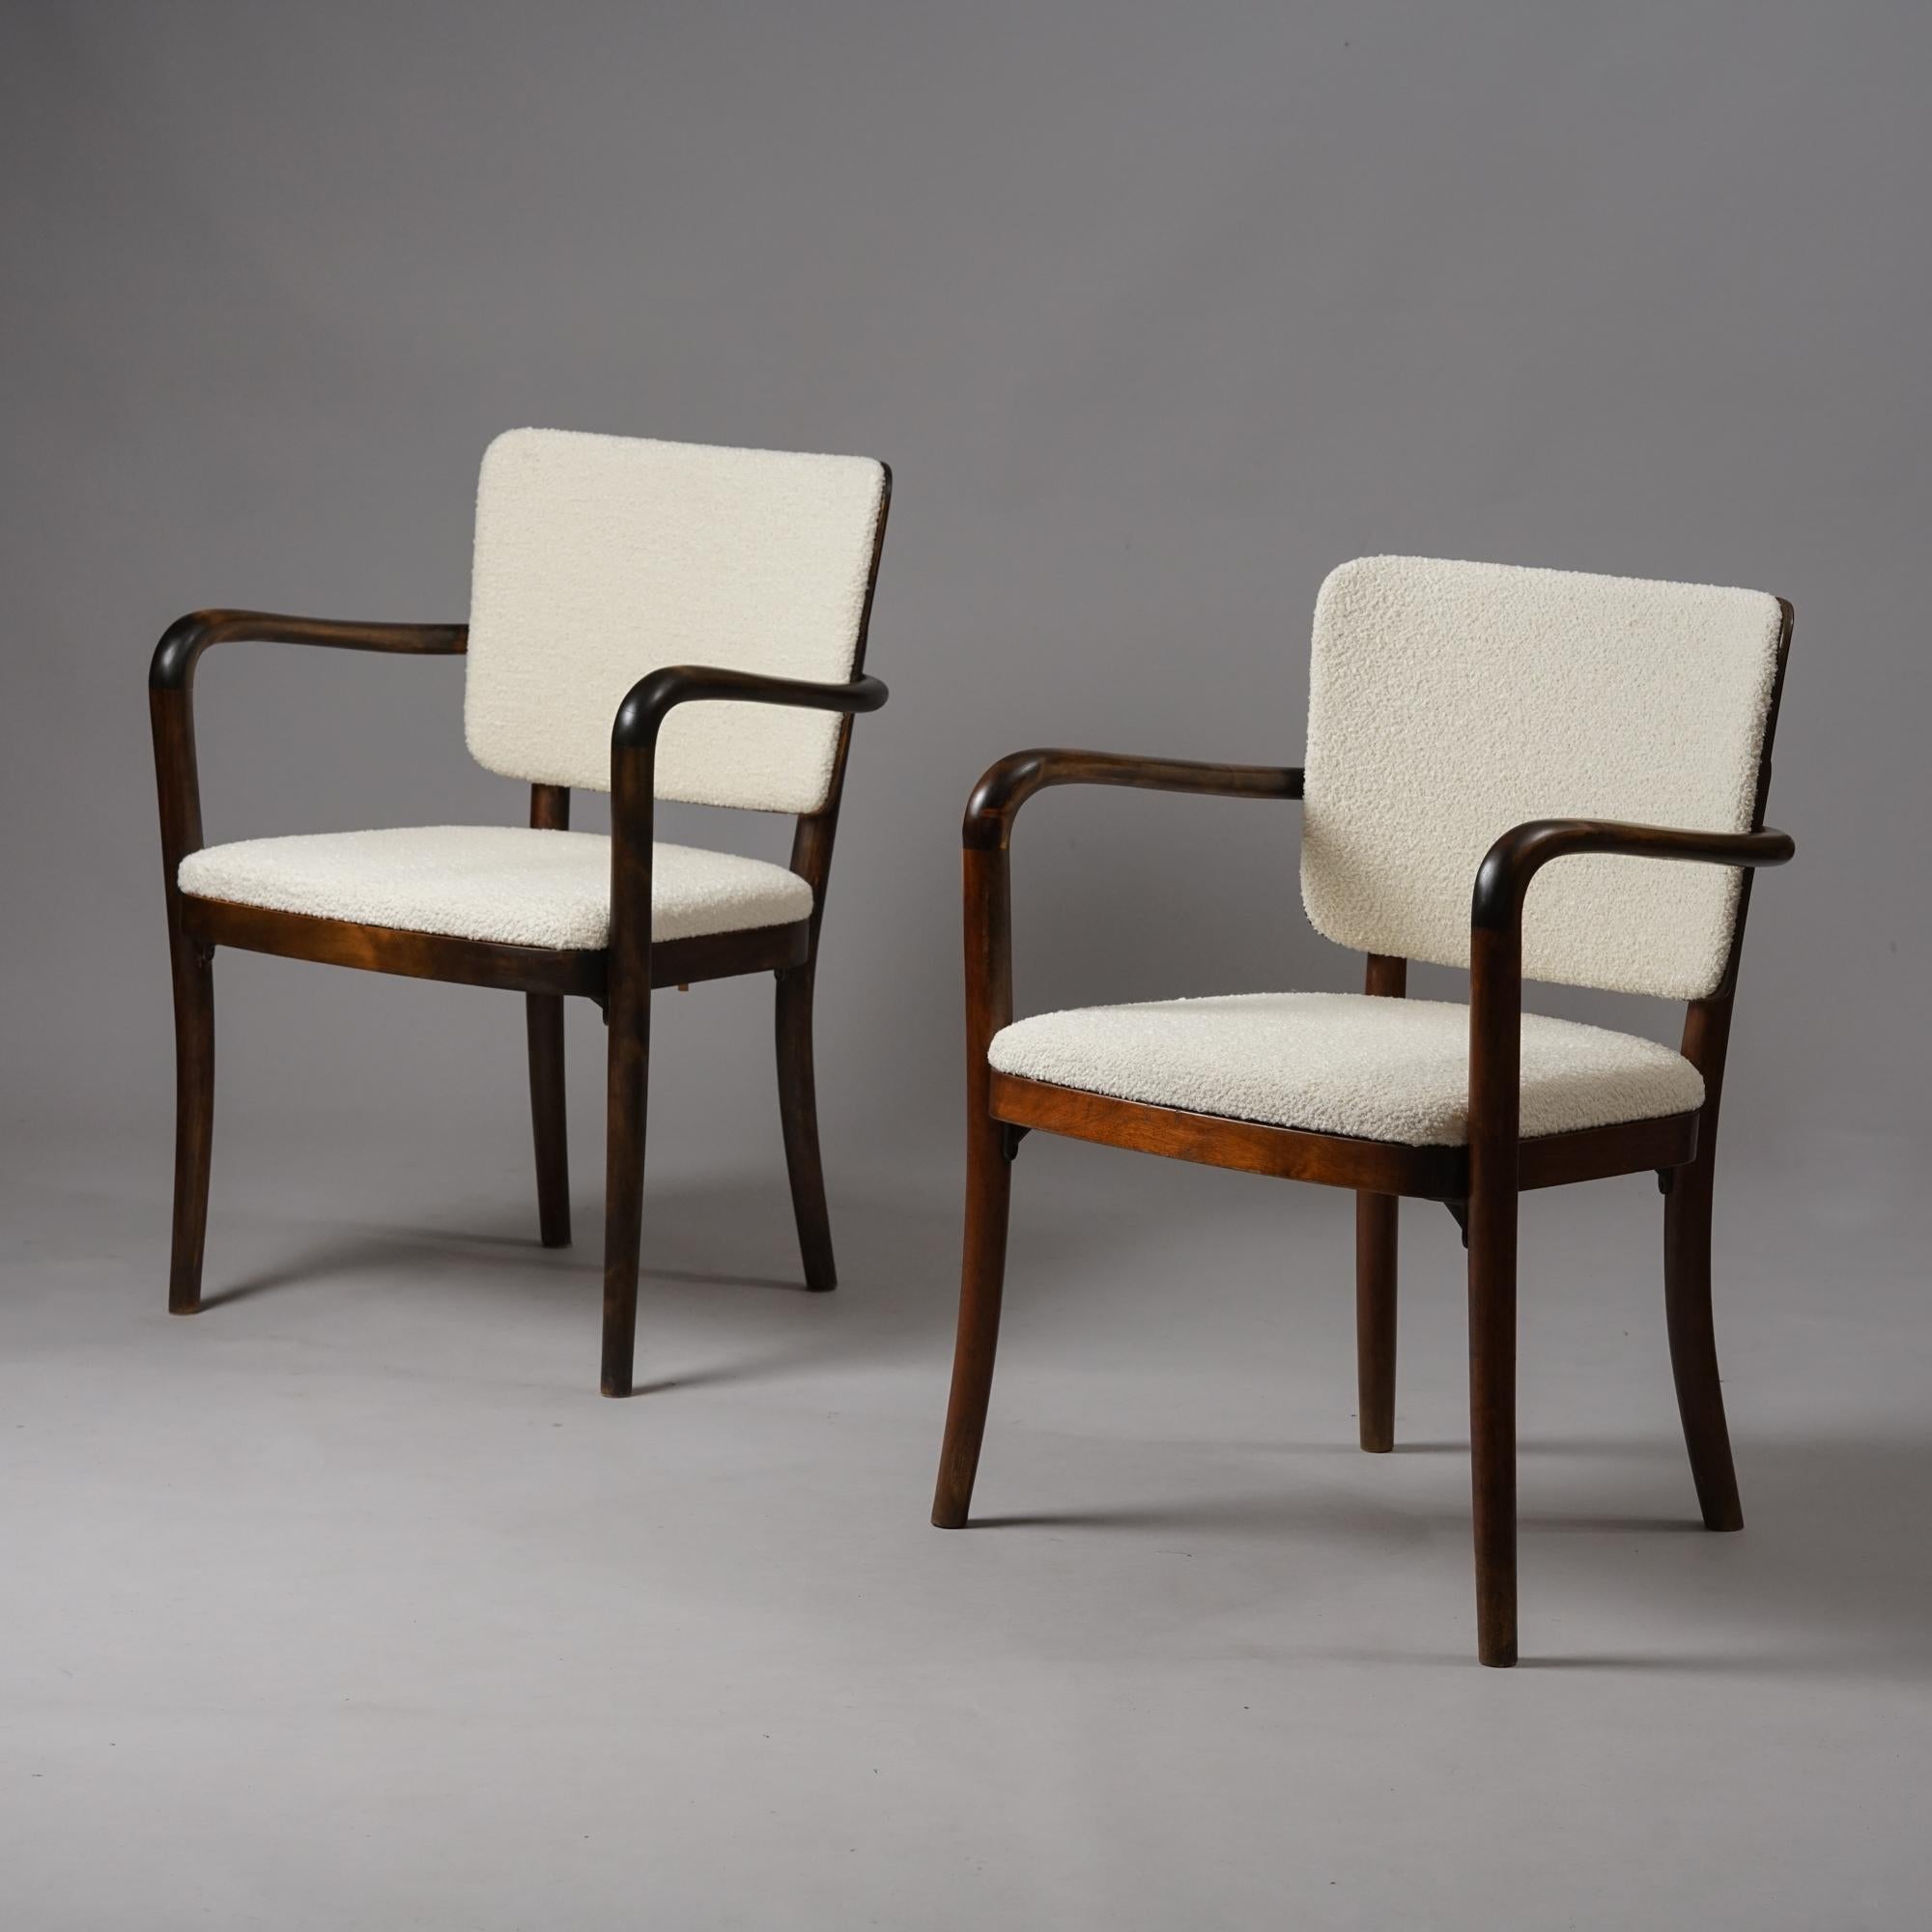 Exceptionally rare set of early Alvar Aalto armchairs for O.Y Wilhelm Schauman A.B Jyväskylä, Finland, 1939. Custom ordered for NY World's Fair Restaurant. Upholstered in quality Lauritzon's fabric.

While the design is not typical Aalto, it is